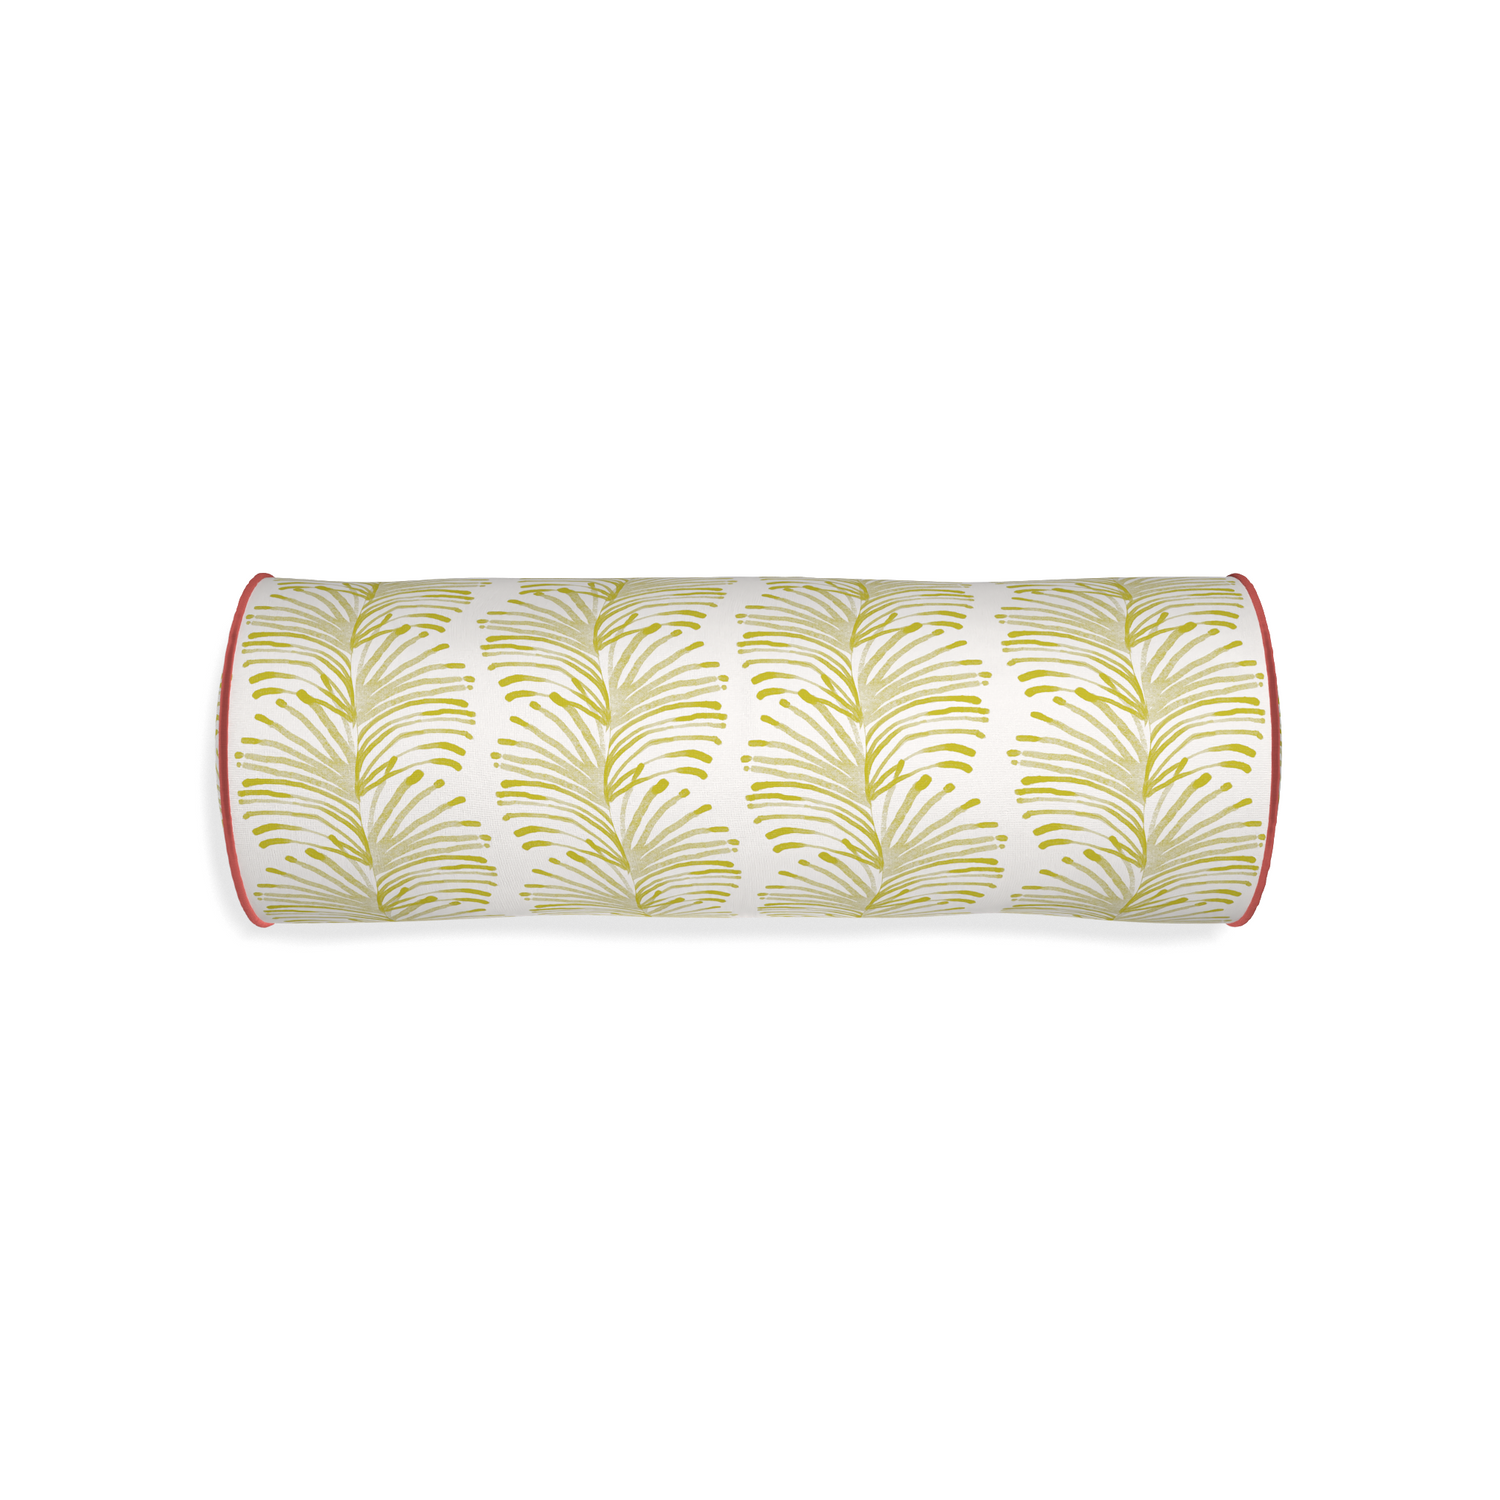 Bolster emma chartreuse custom pillow with c piping on white background